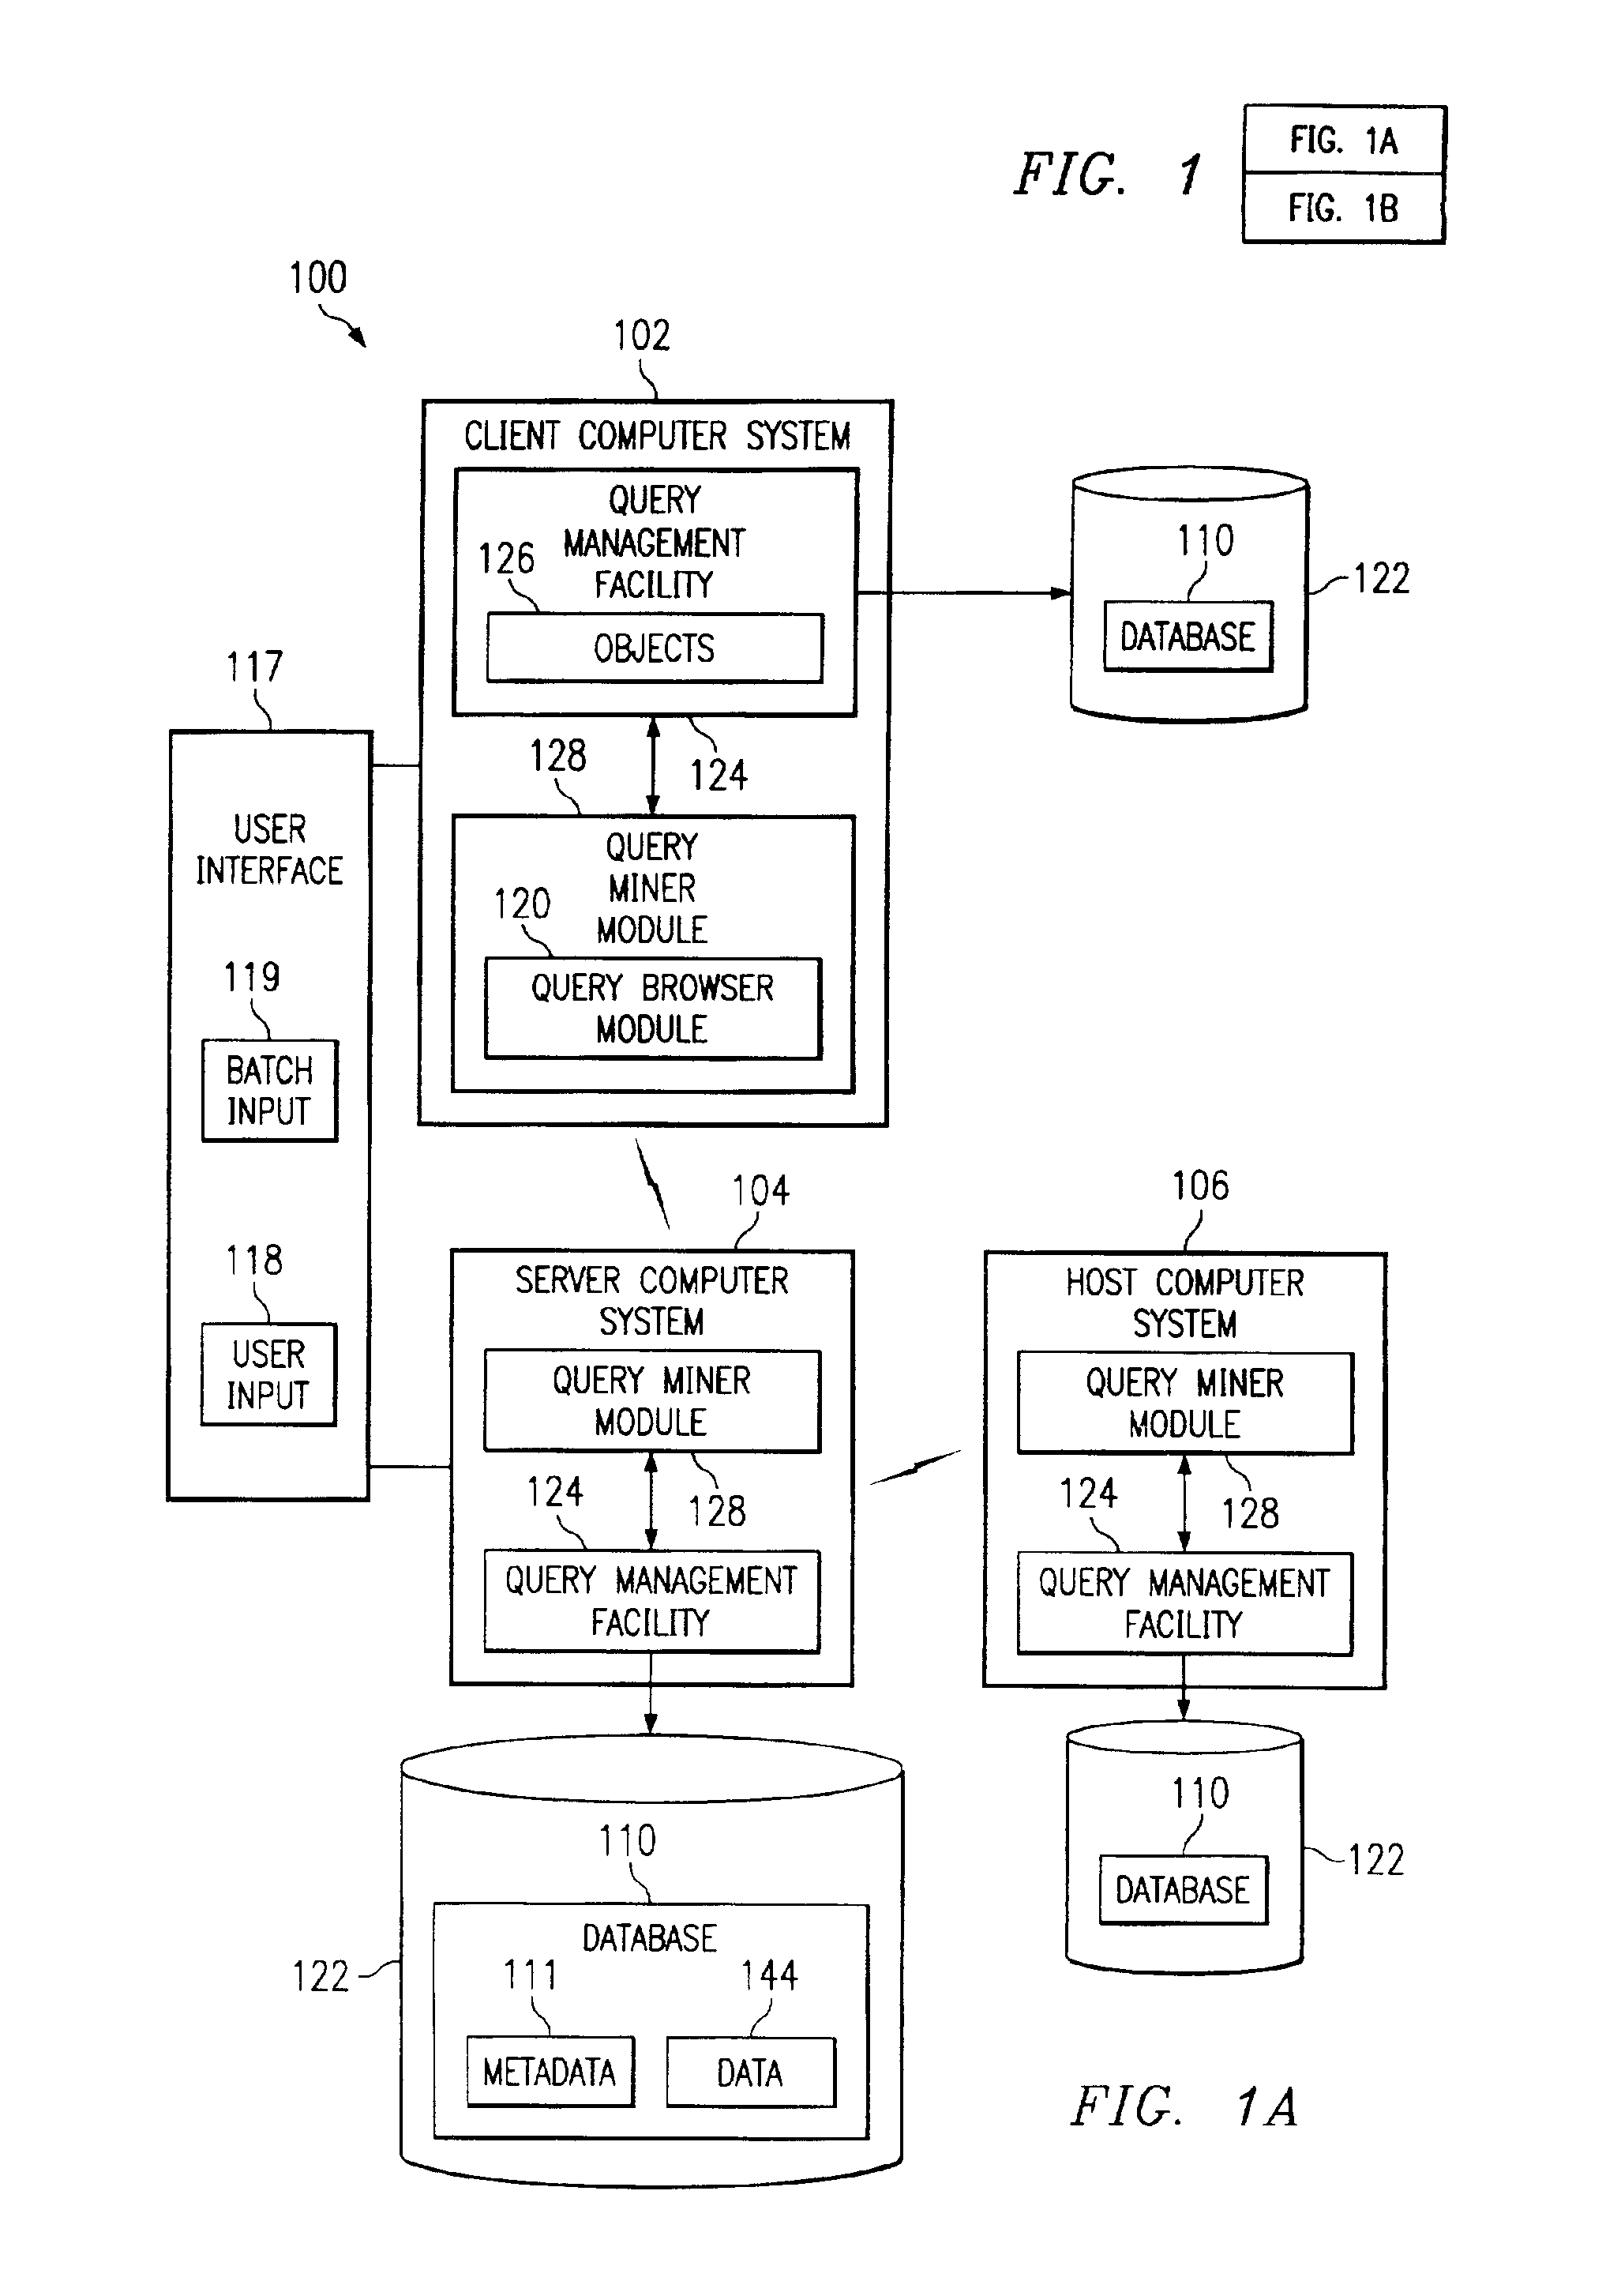 Systems, methods and computer program products to determine useful relationships and dimensions of a database